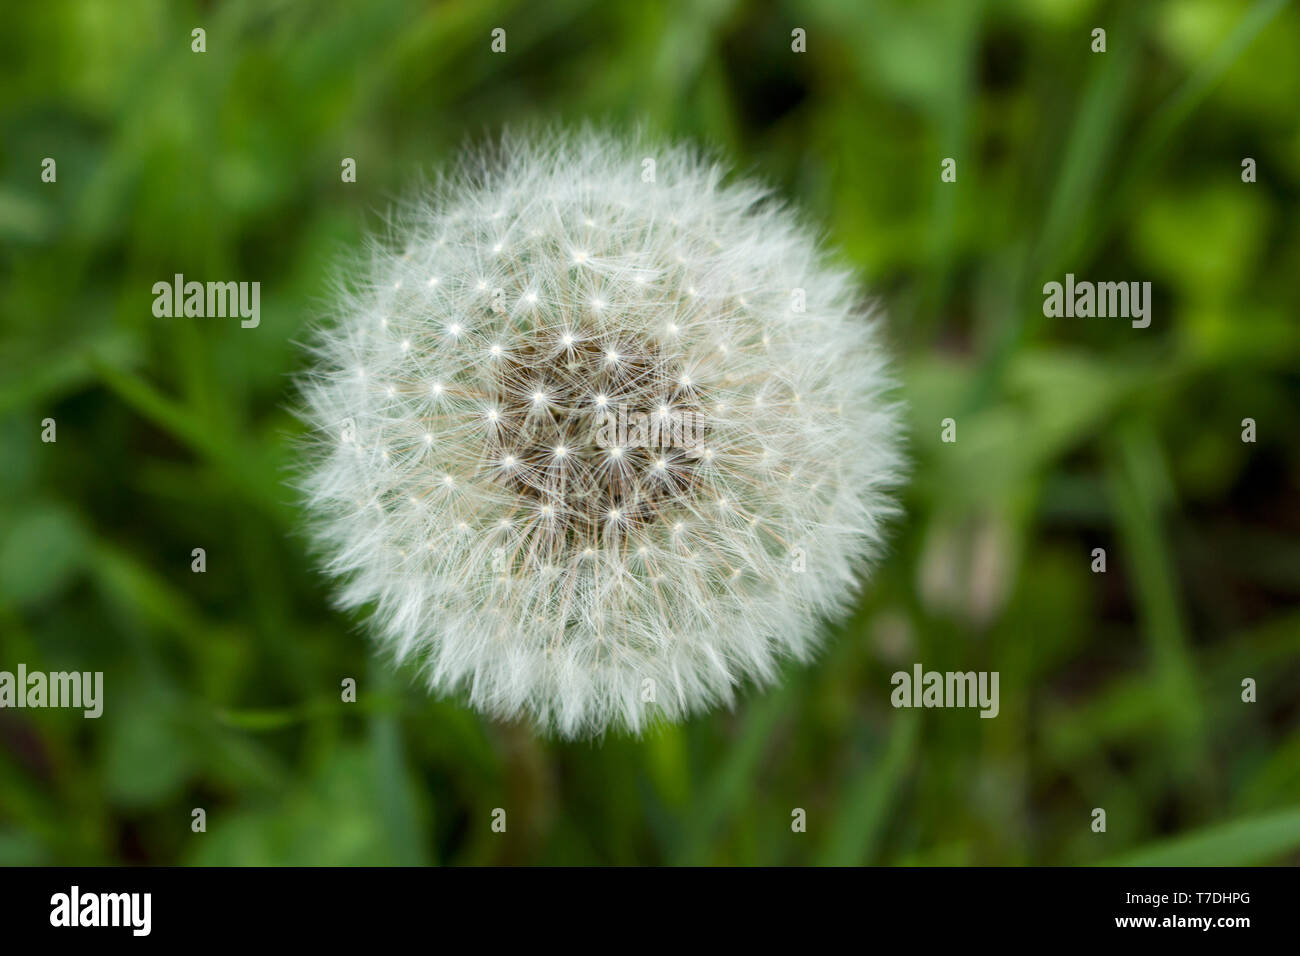 Dandelion seeds. Blossom time. Green grass. Spring flowers in wild nature. Stock Photo